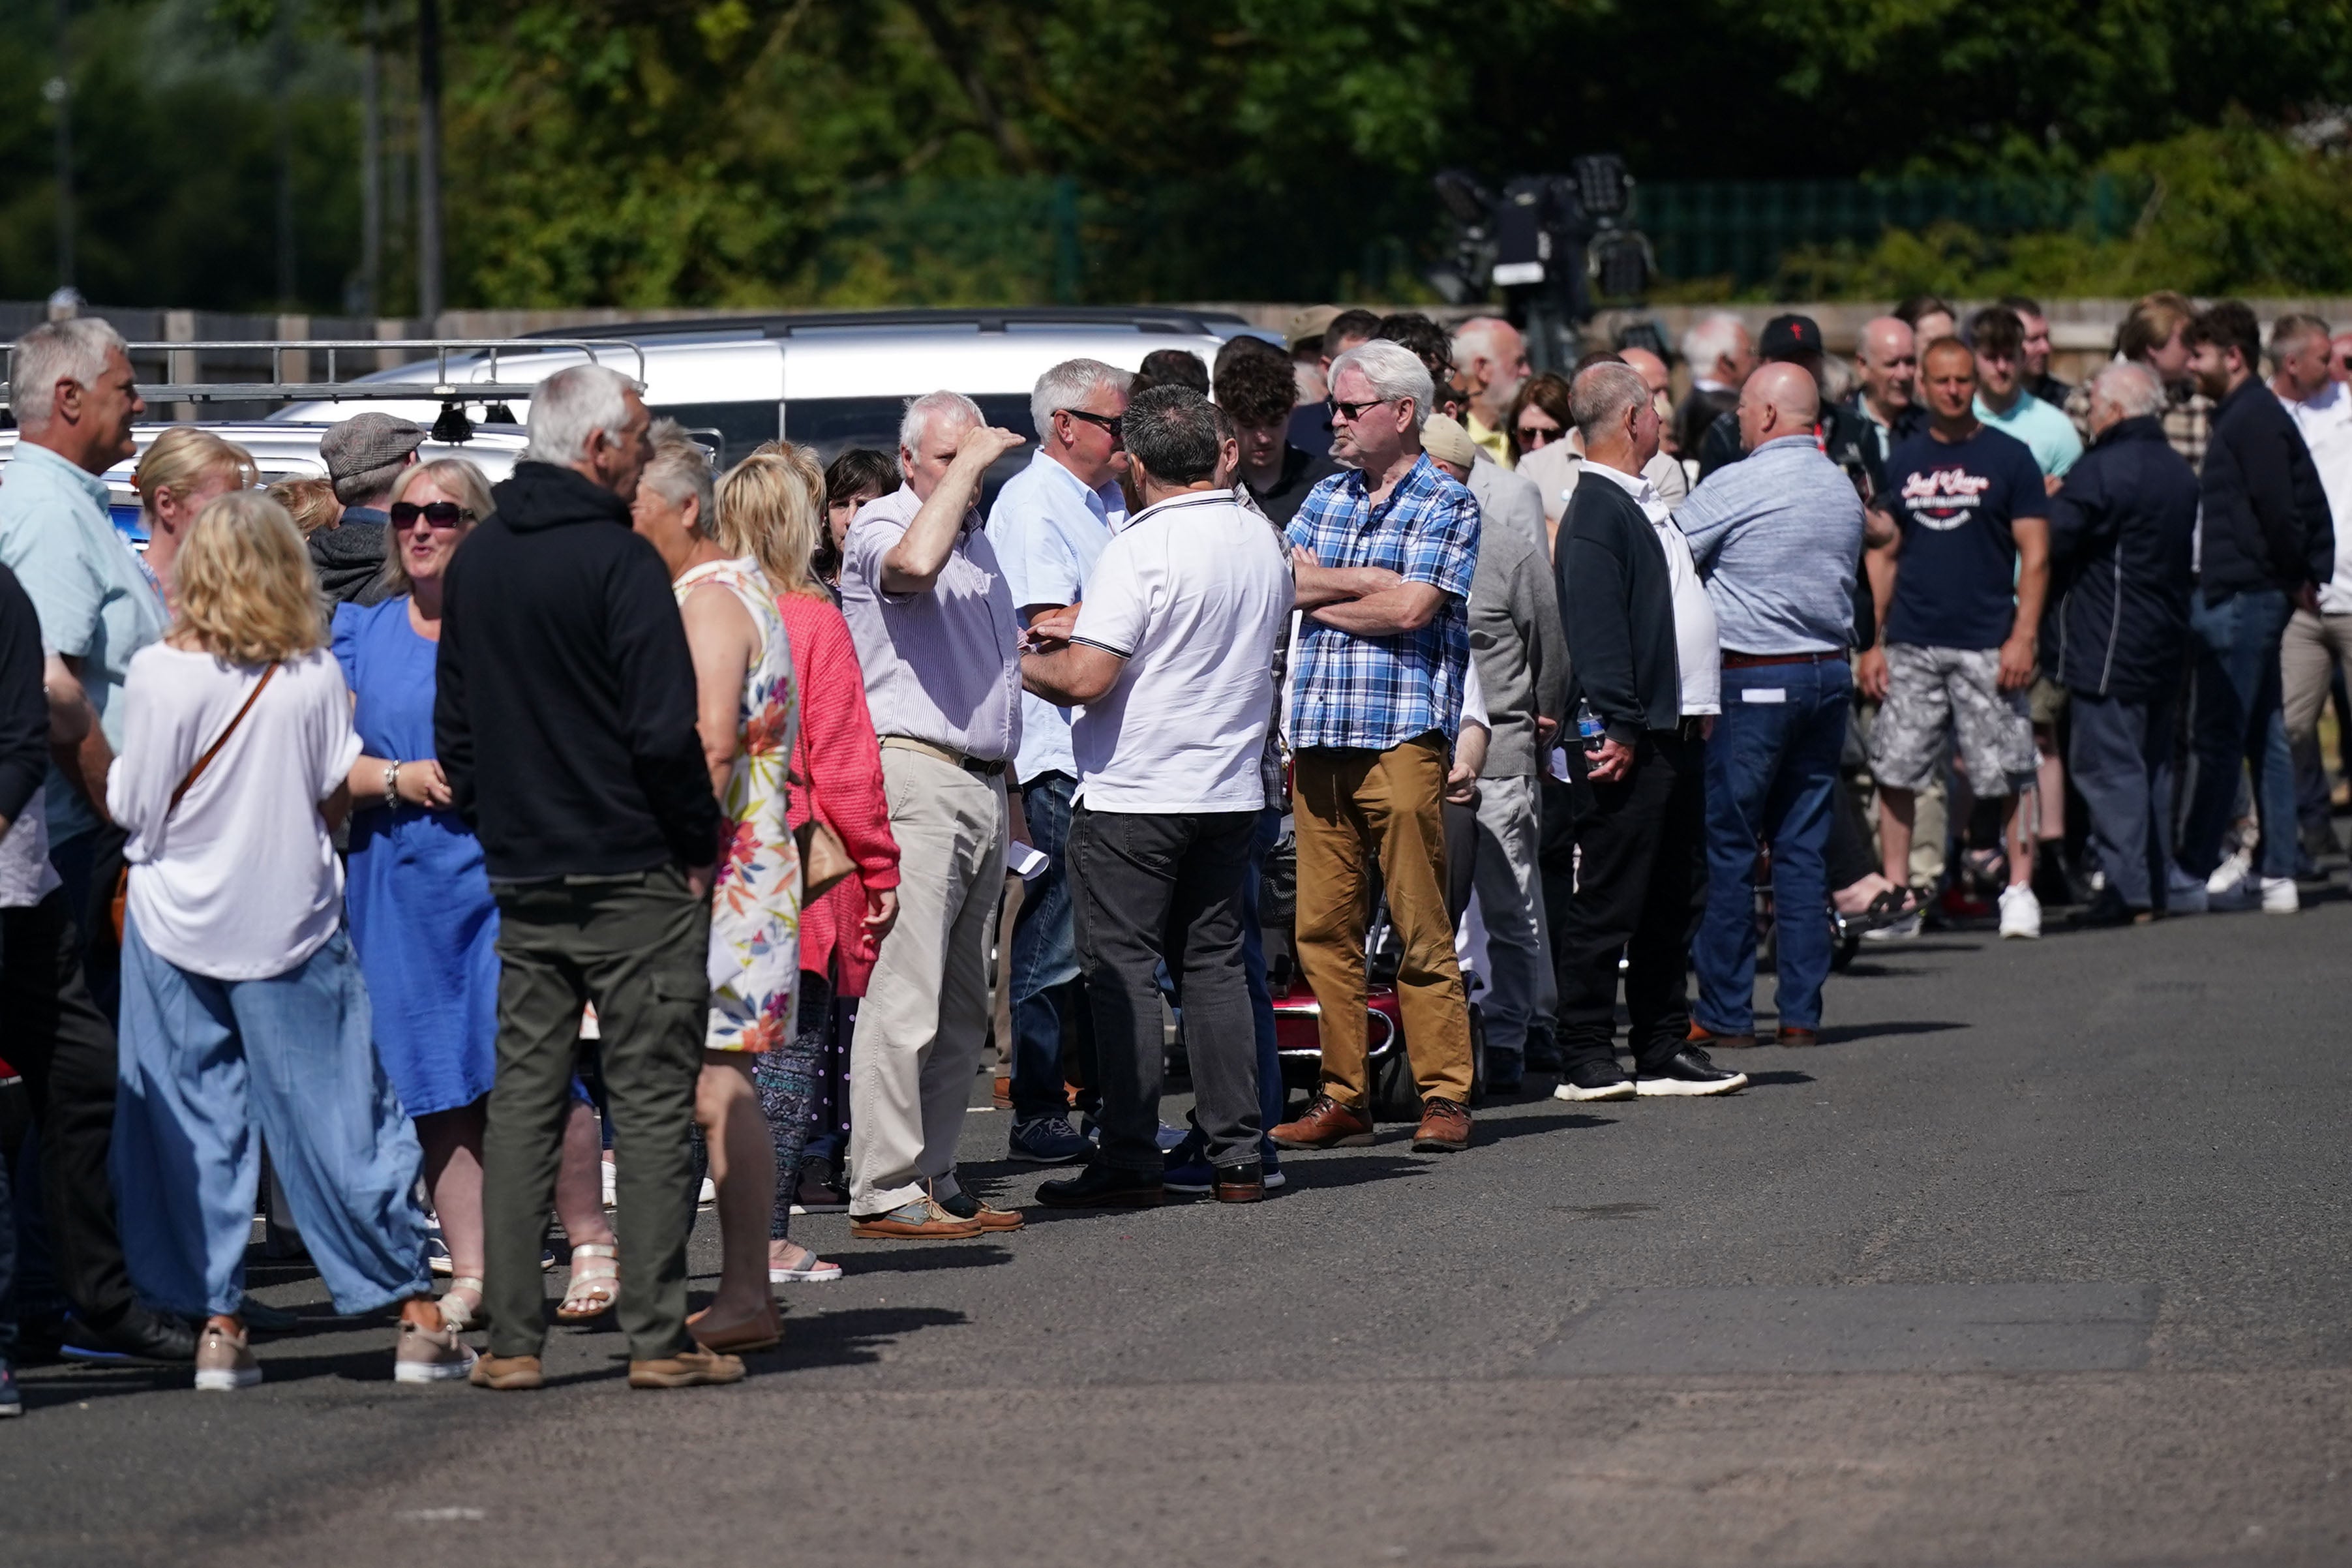 People queue ahead of a campaign event by Reform UK leader Nigel Farage at Rainton Arena in Houghton-le-Spring